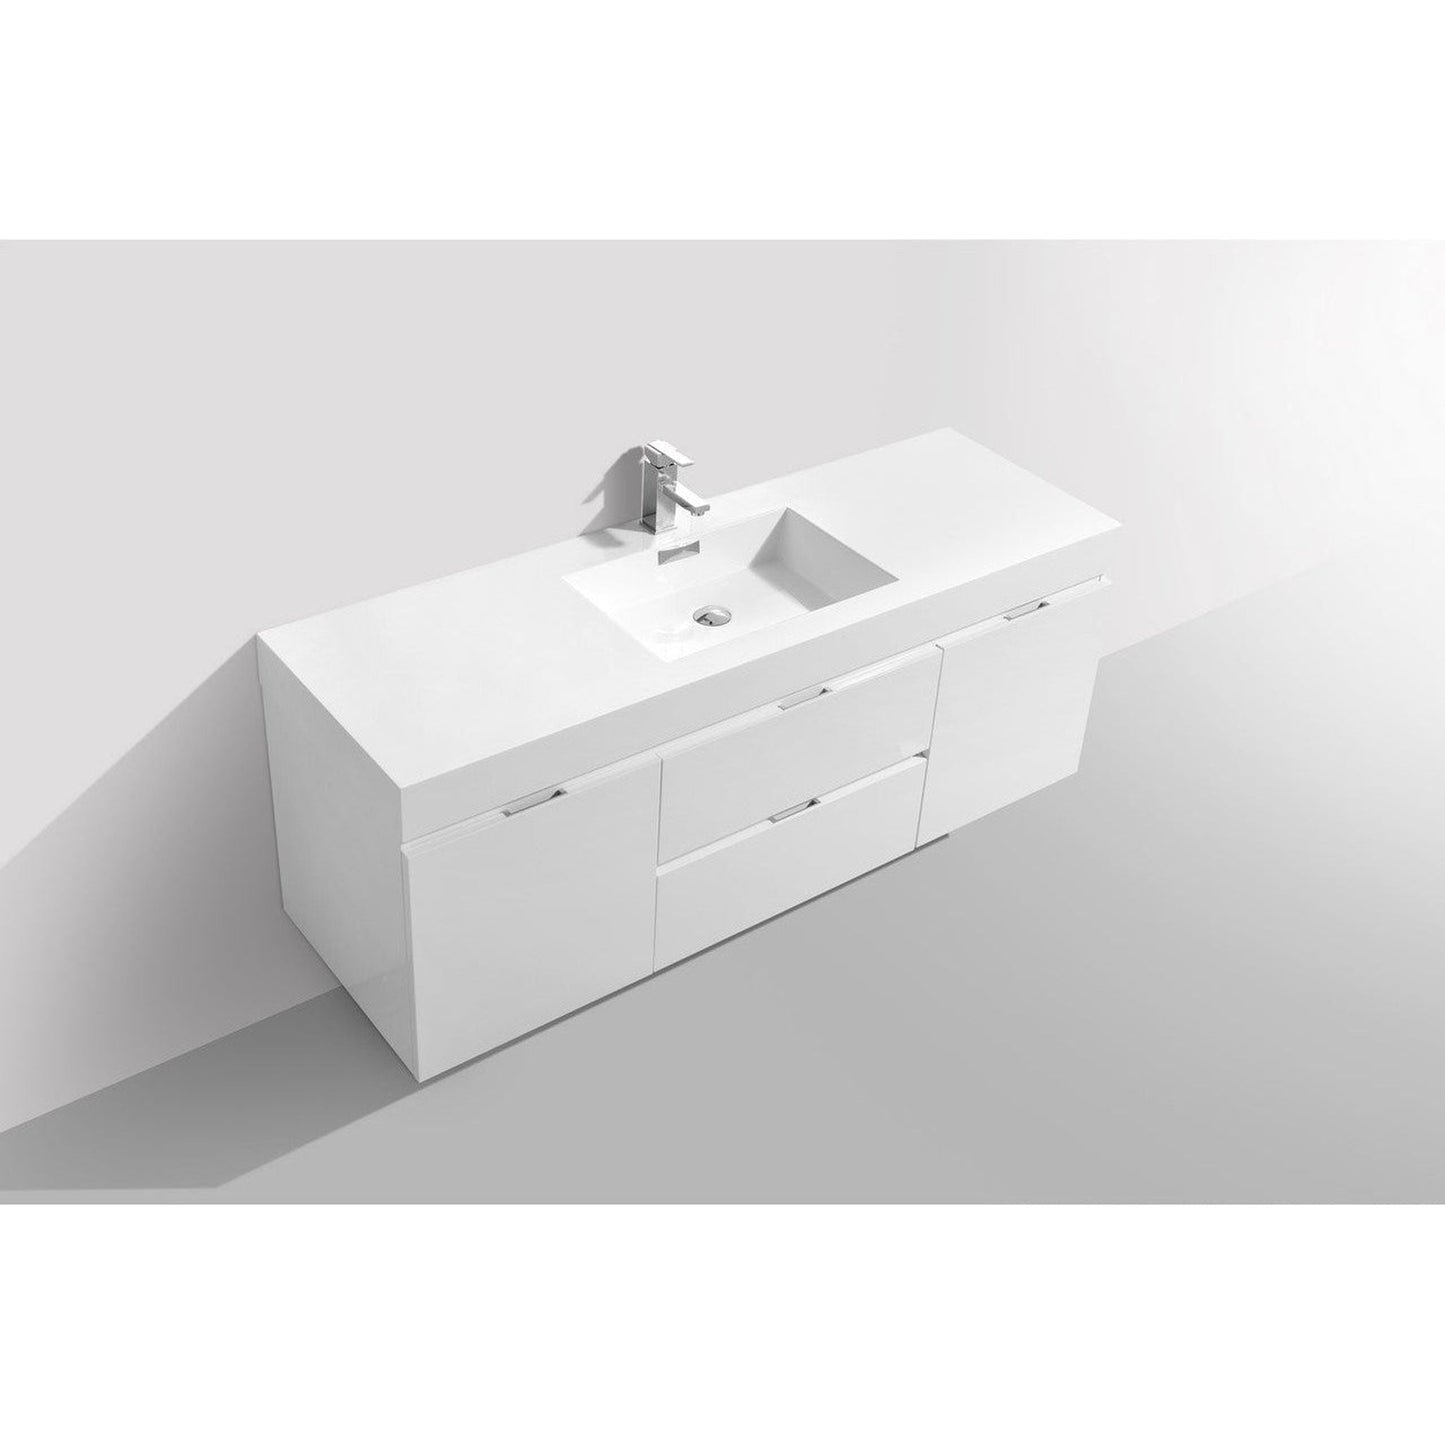 KubeBath Bliss 60" High Gloss White Wall-Mounted Modern Bathroom Vanity With Single Integrated Acrylic Sink With Overflow and 60" White Framed Mirror With Shelf